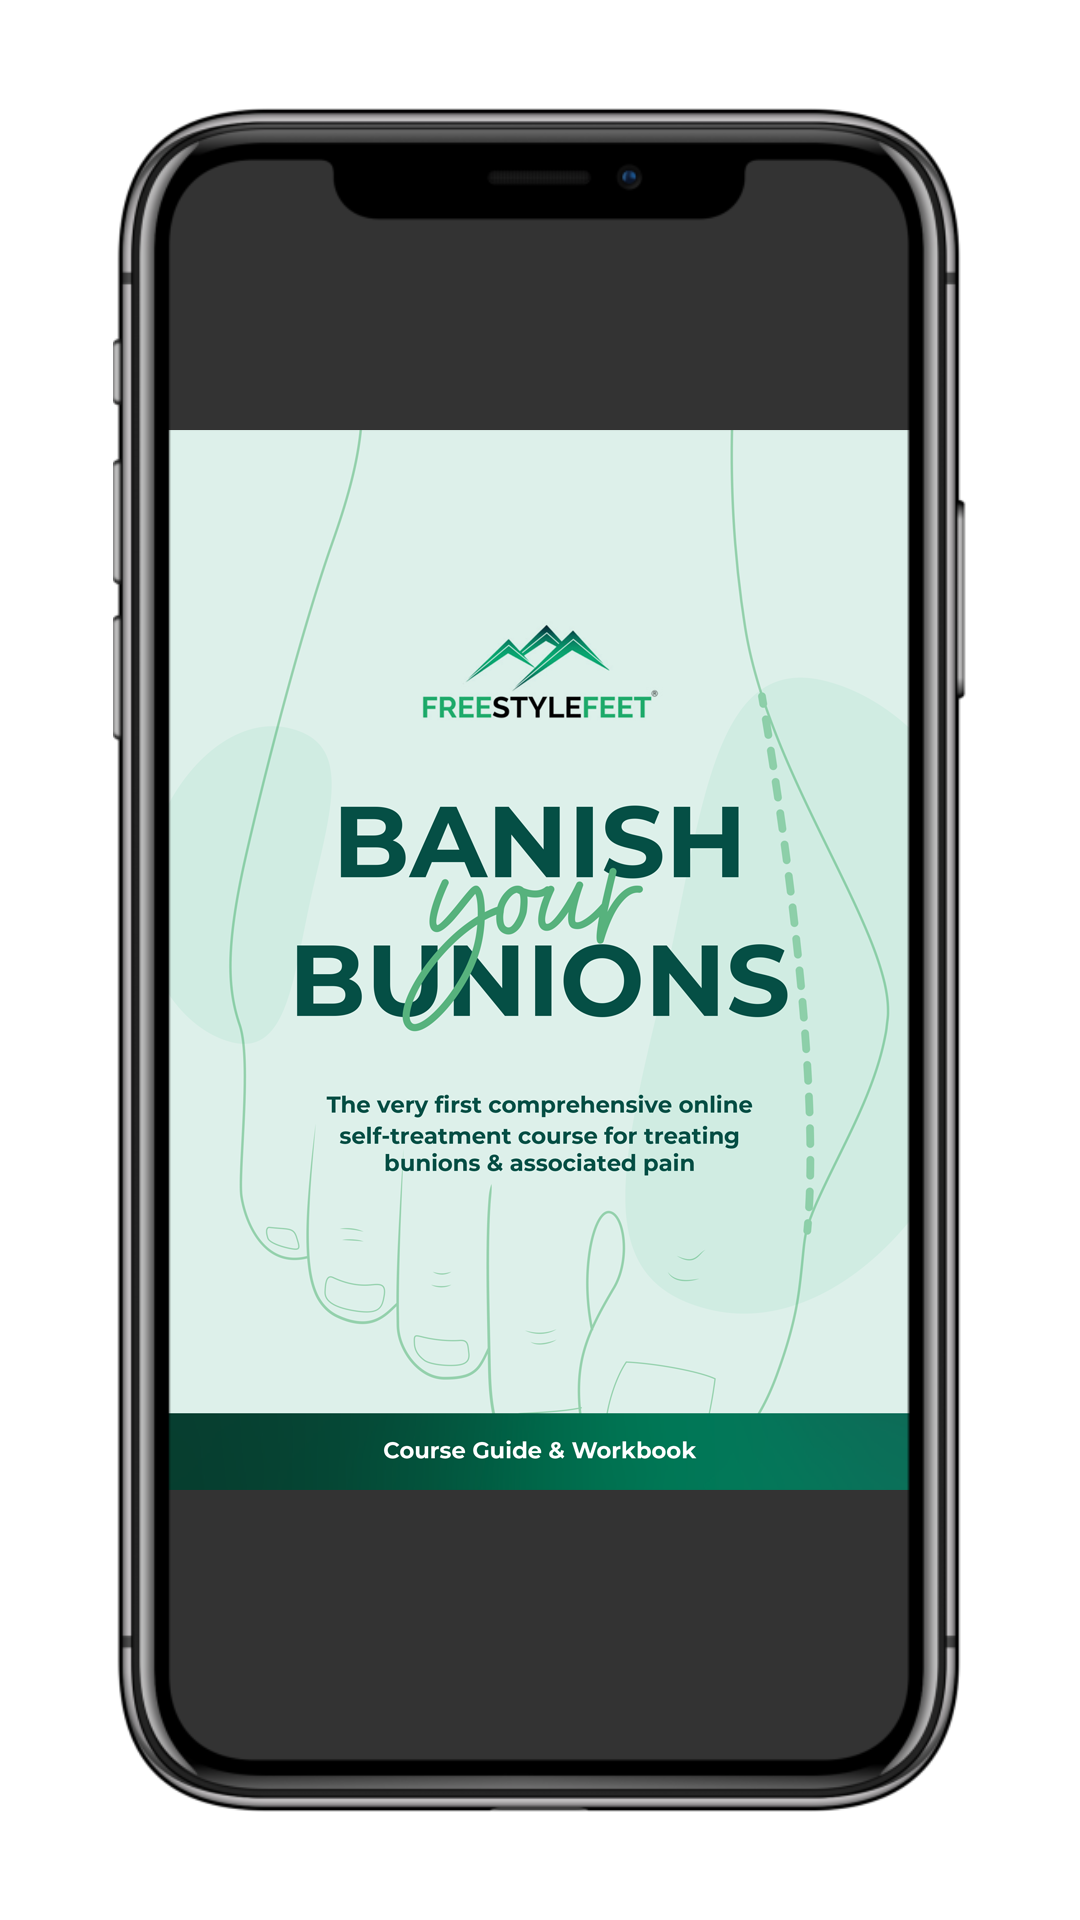 Banish Bunions - Online Course + Products